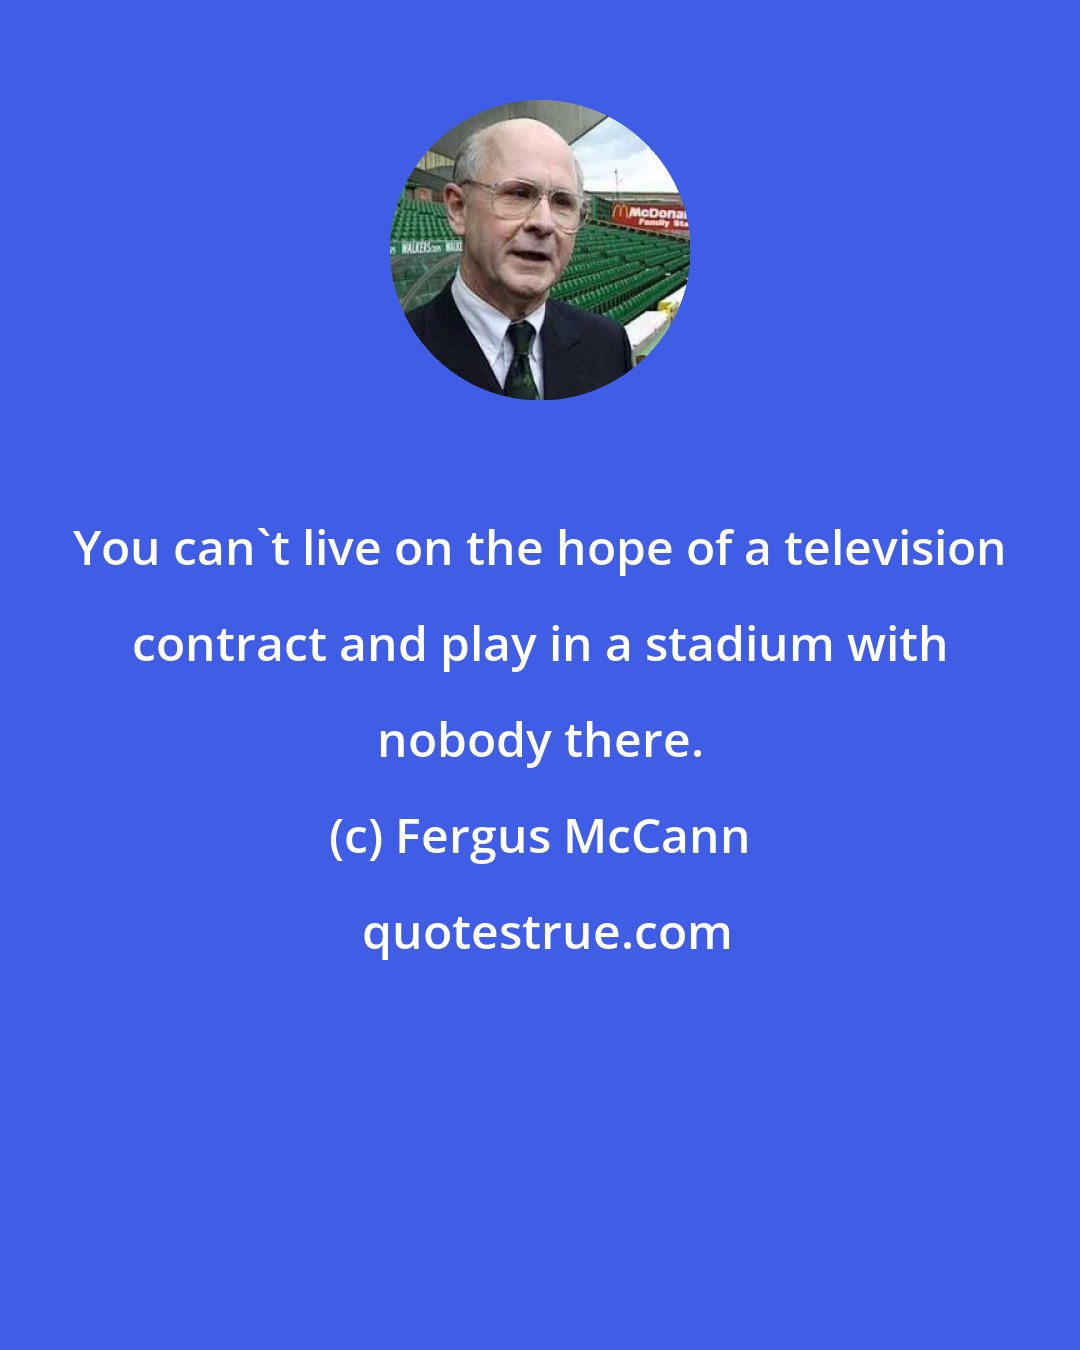 Fergus McCann: You can't live on the hope of a television contract and play in a stadium with nobody there.